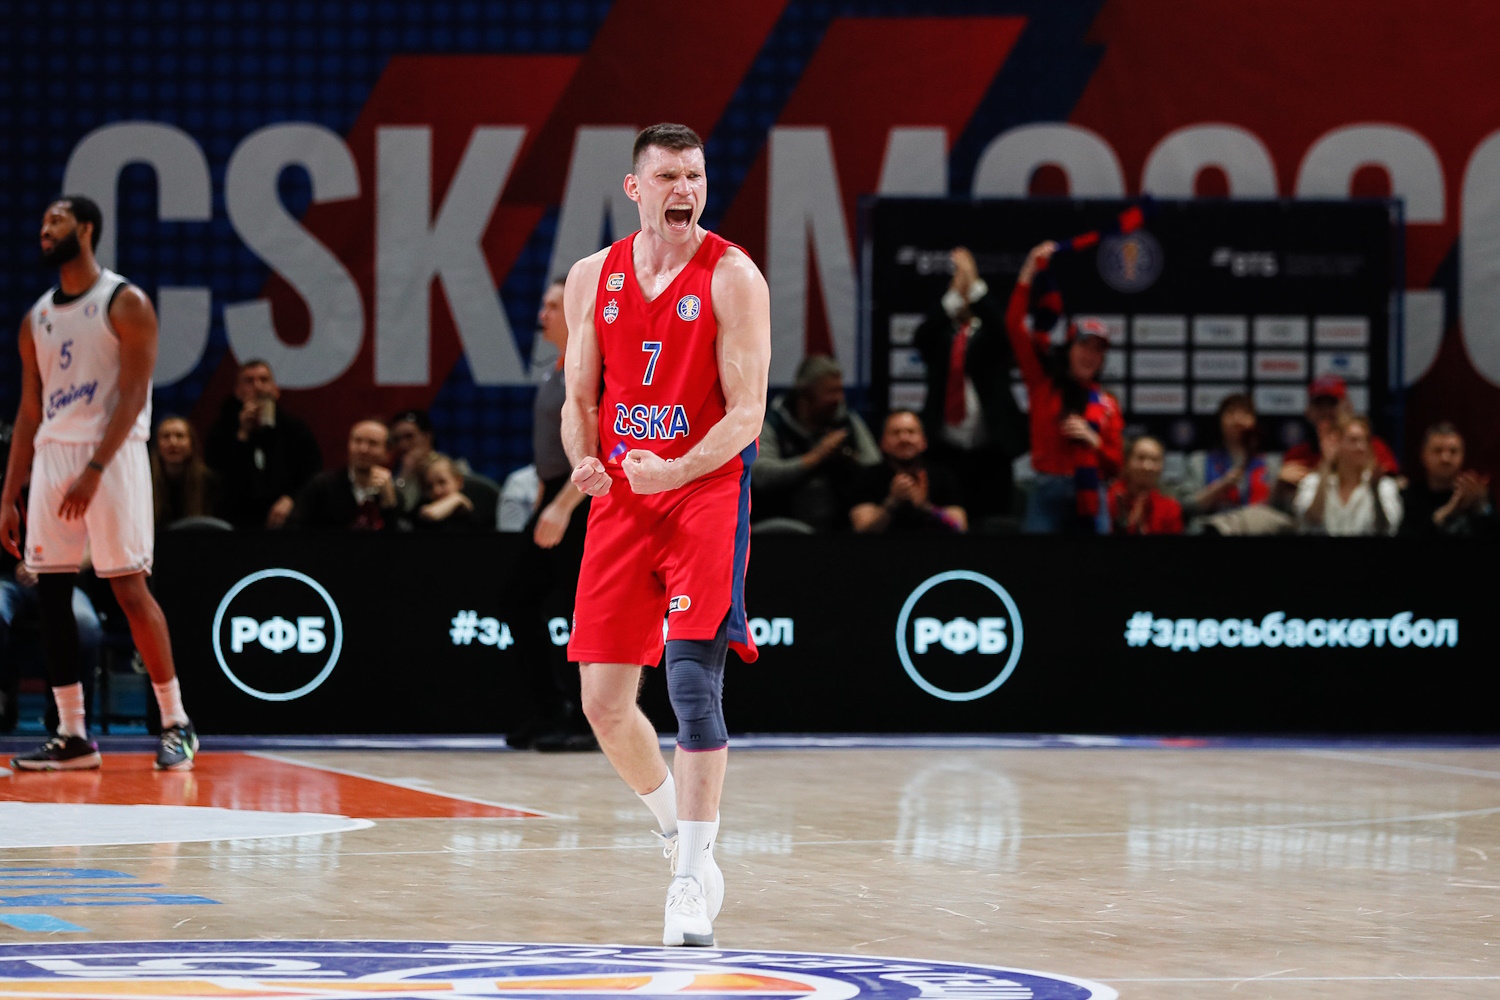 Ivan Ukhov helped CSKA beat Enisey with 17 points, 7 rebounds, 7 assists